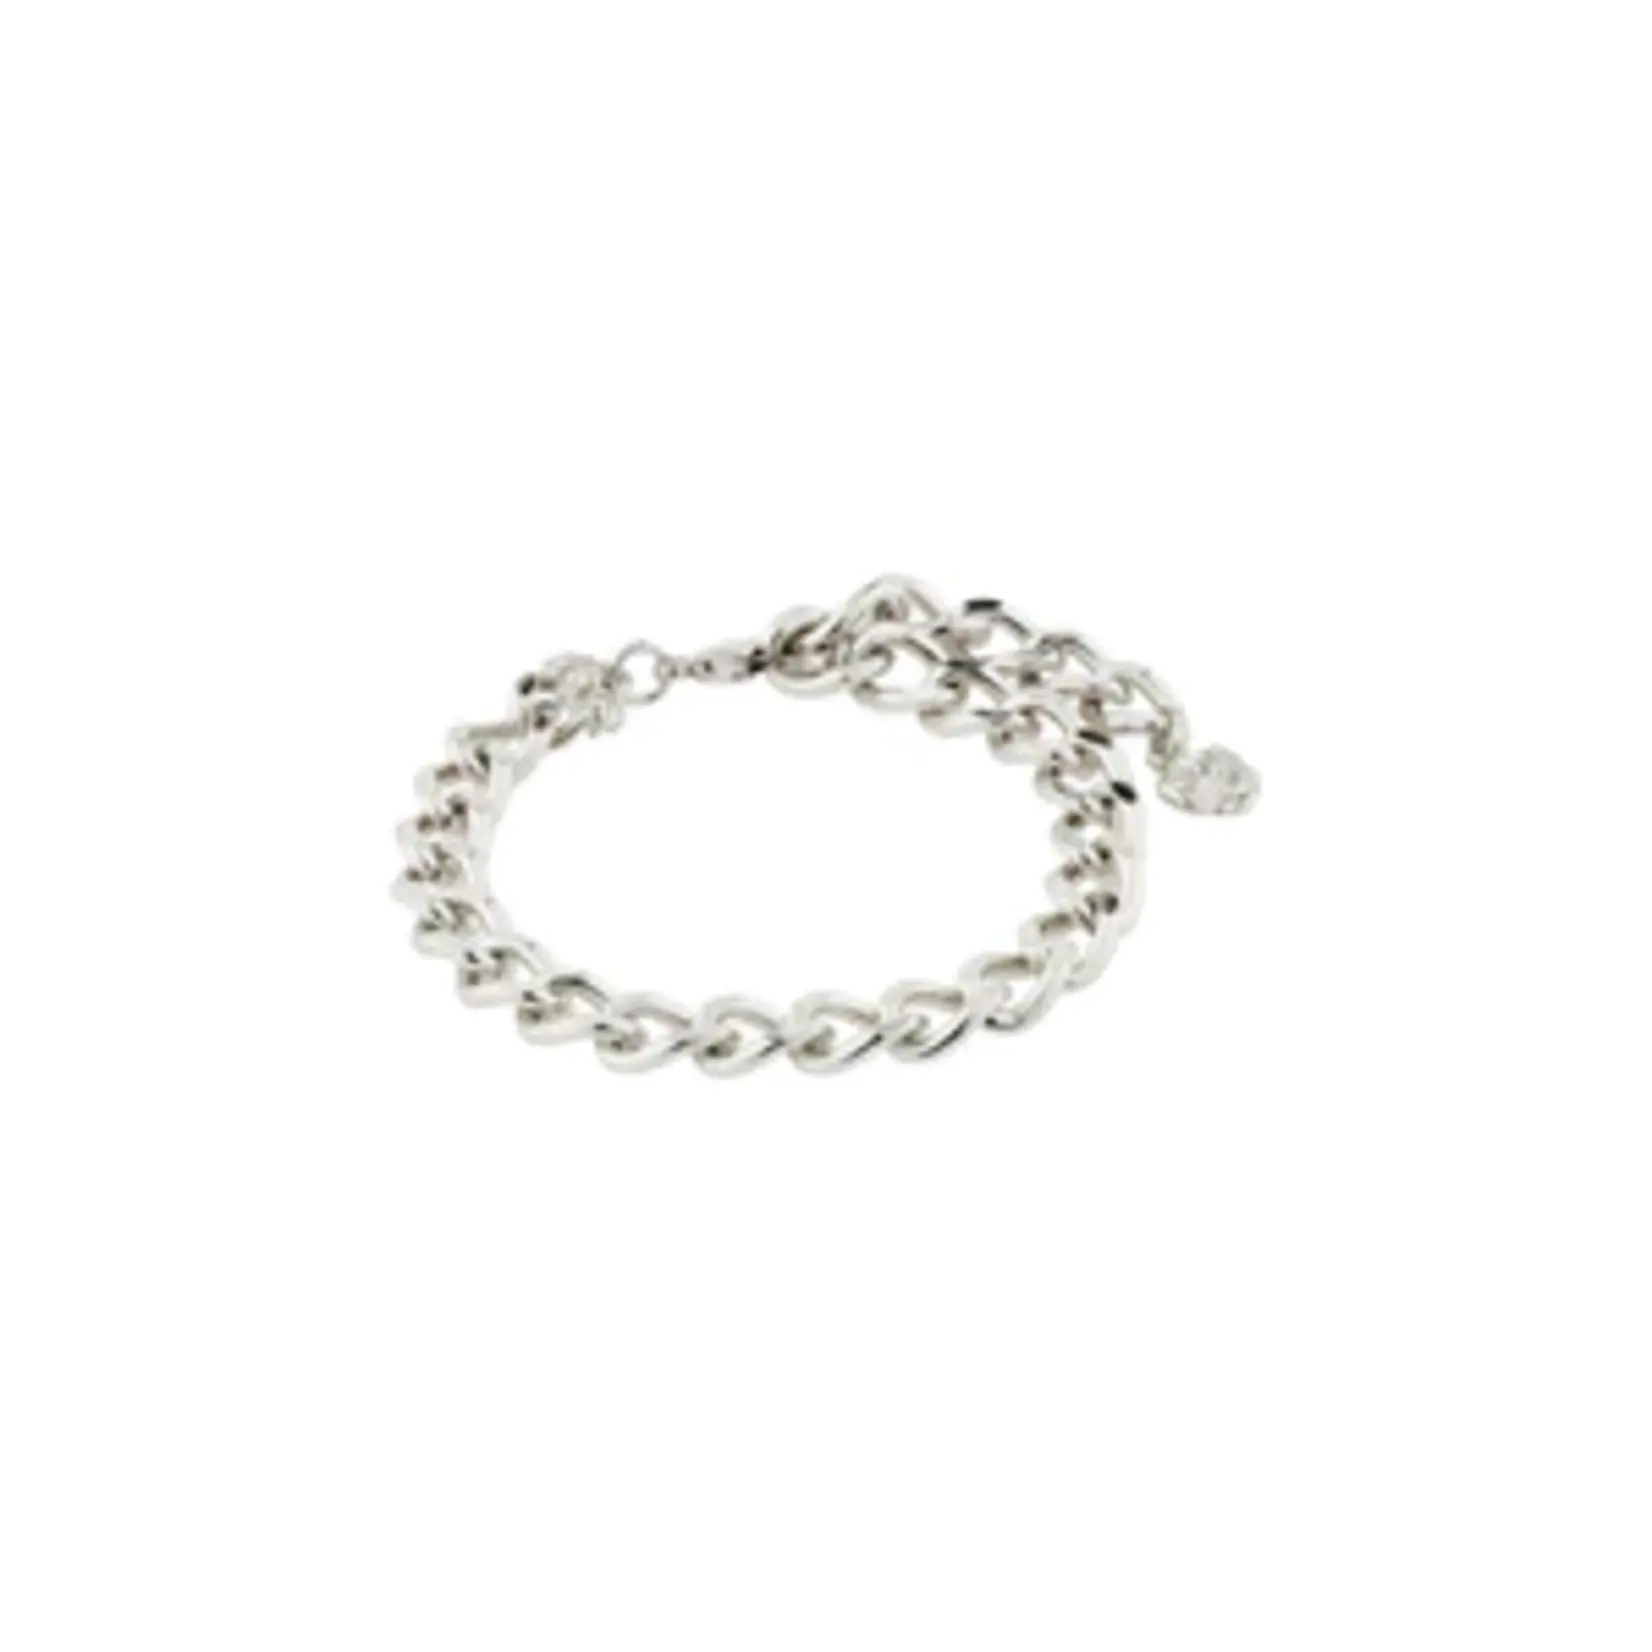 Pilgrim Bracelet Charm Recycled Curb, Silver-Plated